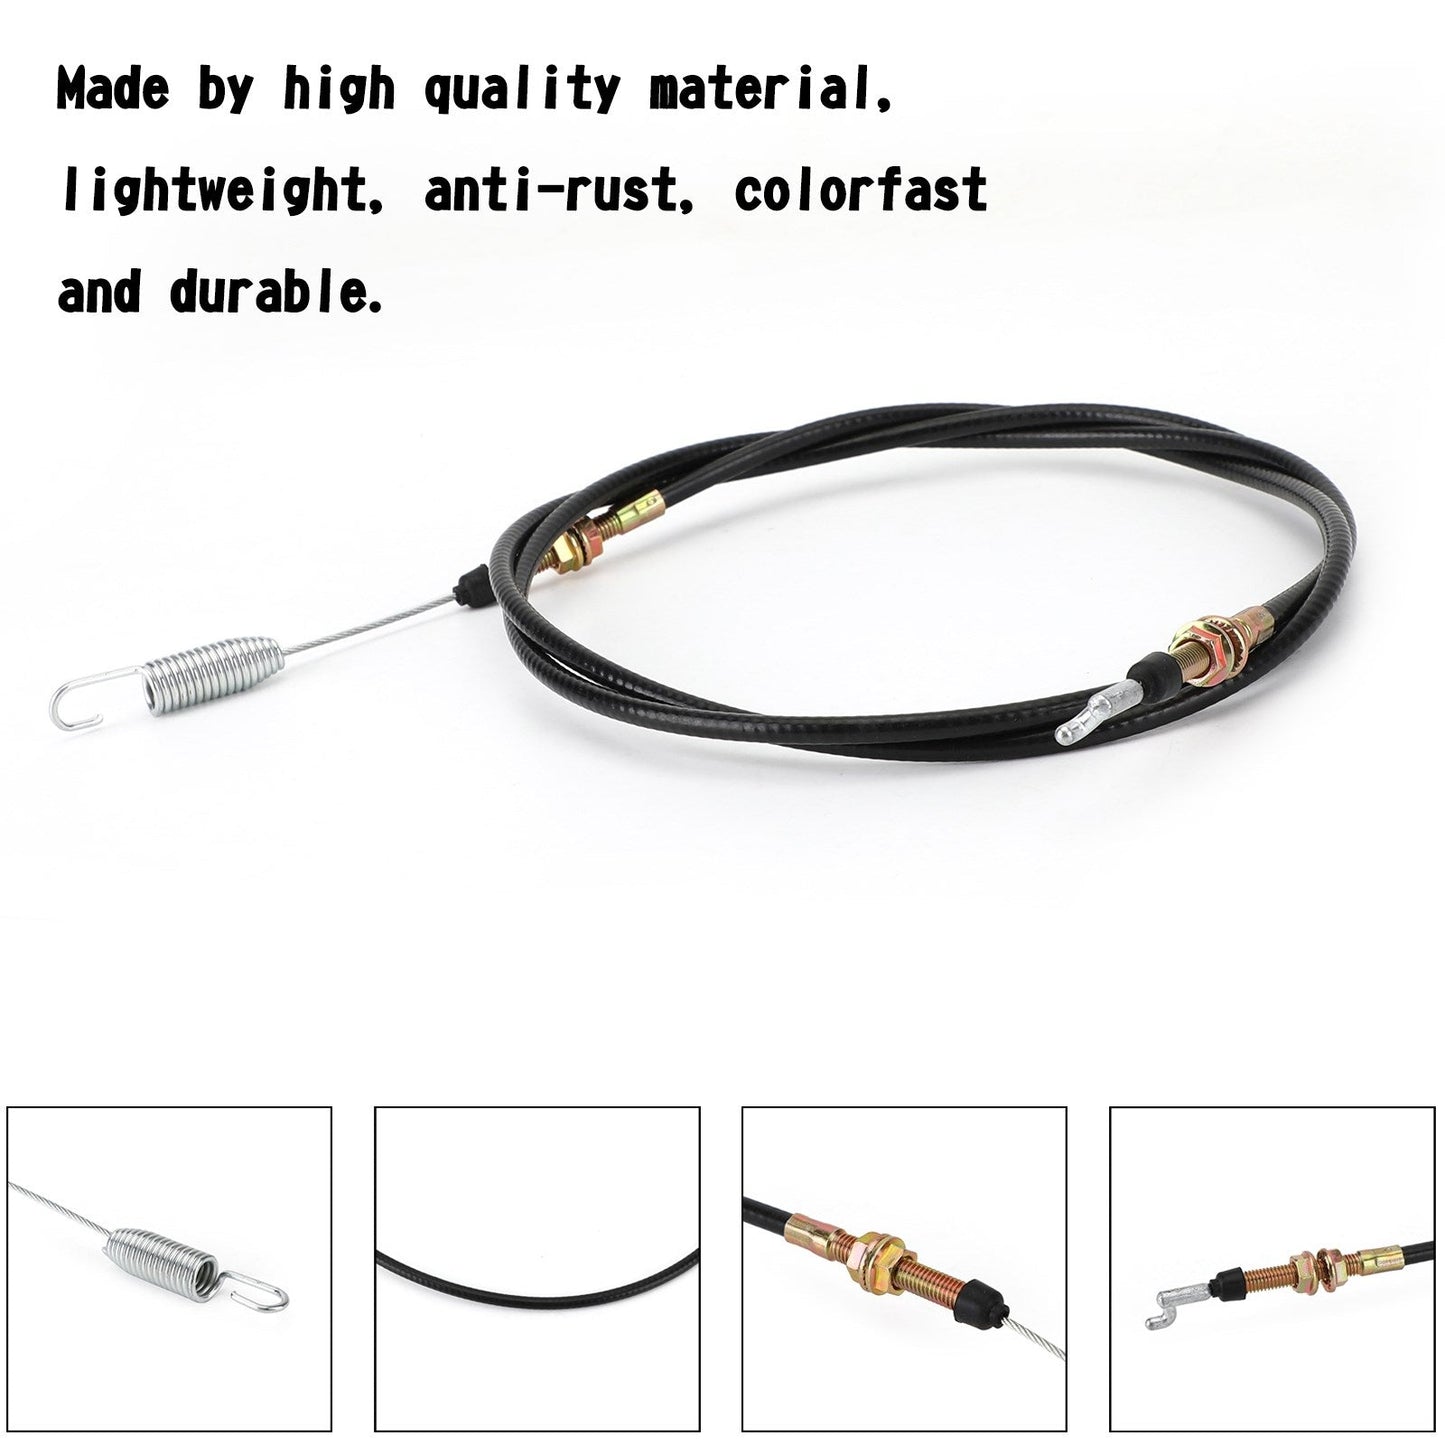 1Pcs Shifter Cable 2-11082 For Chuck Wagon Trail Wagon Land Master LM400 LM650